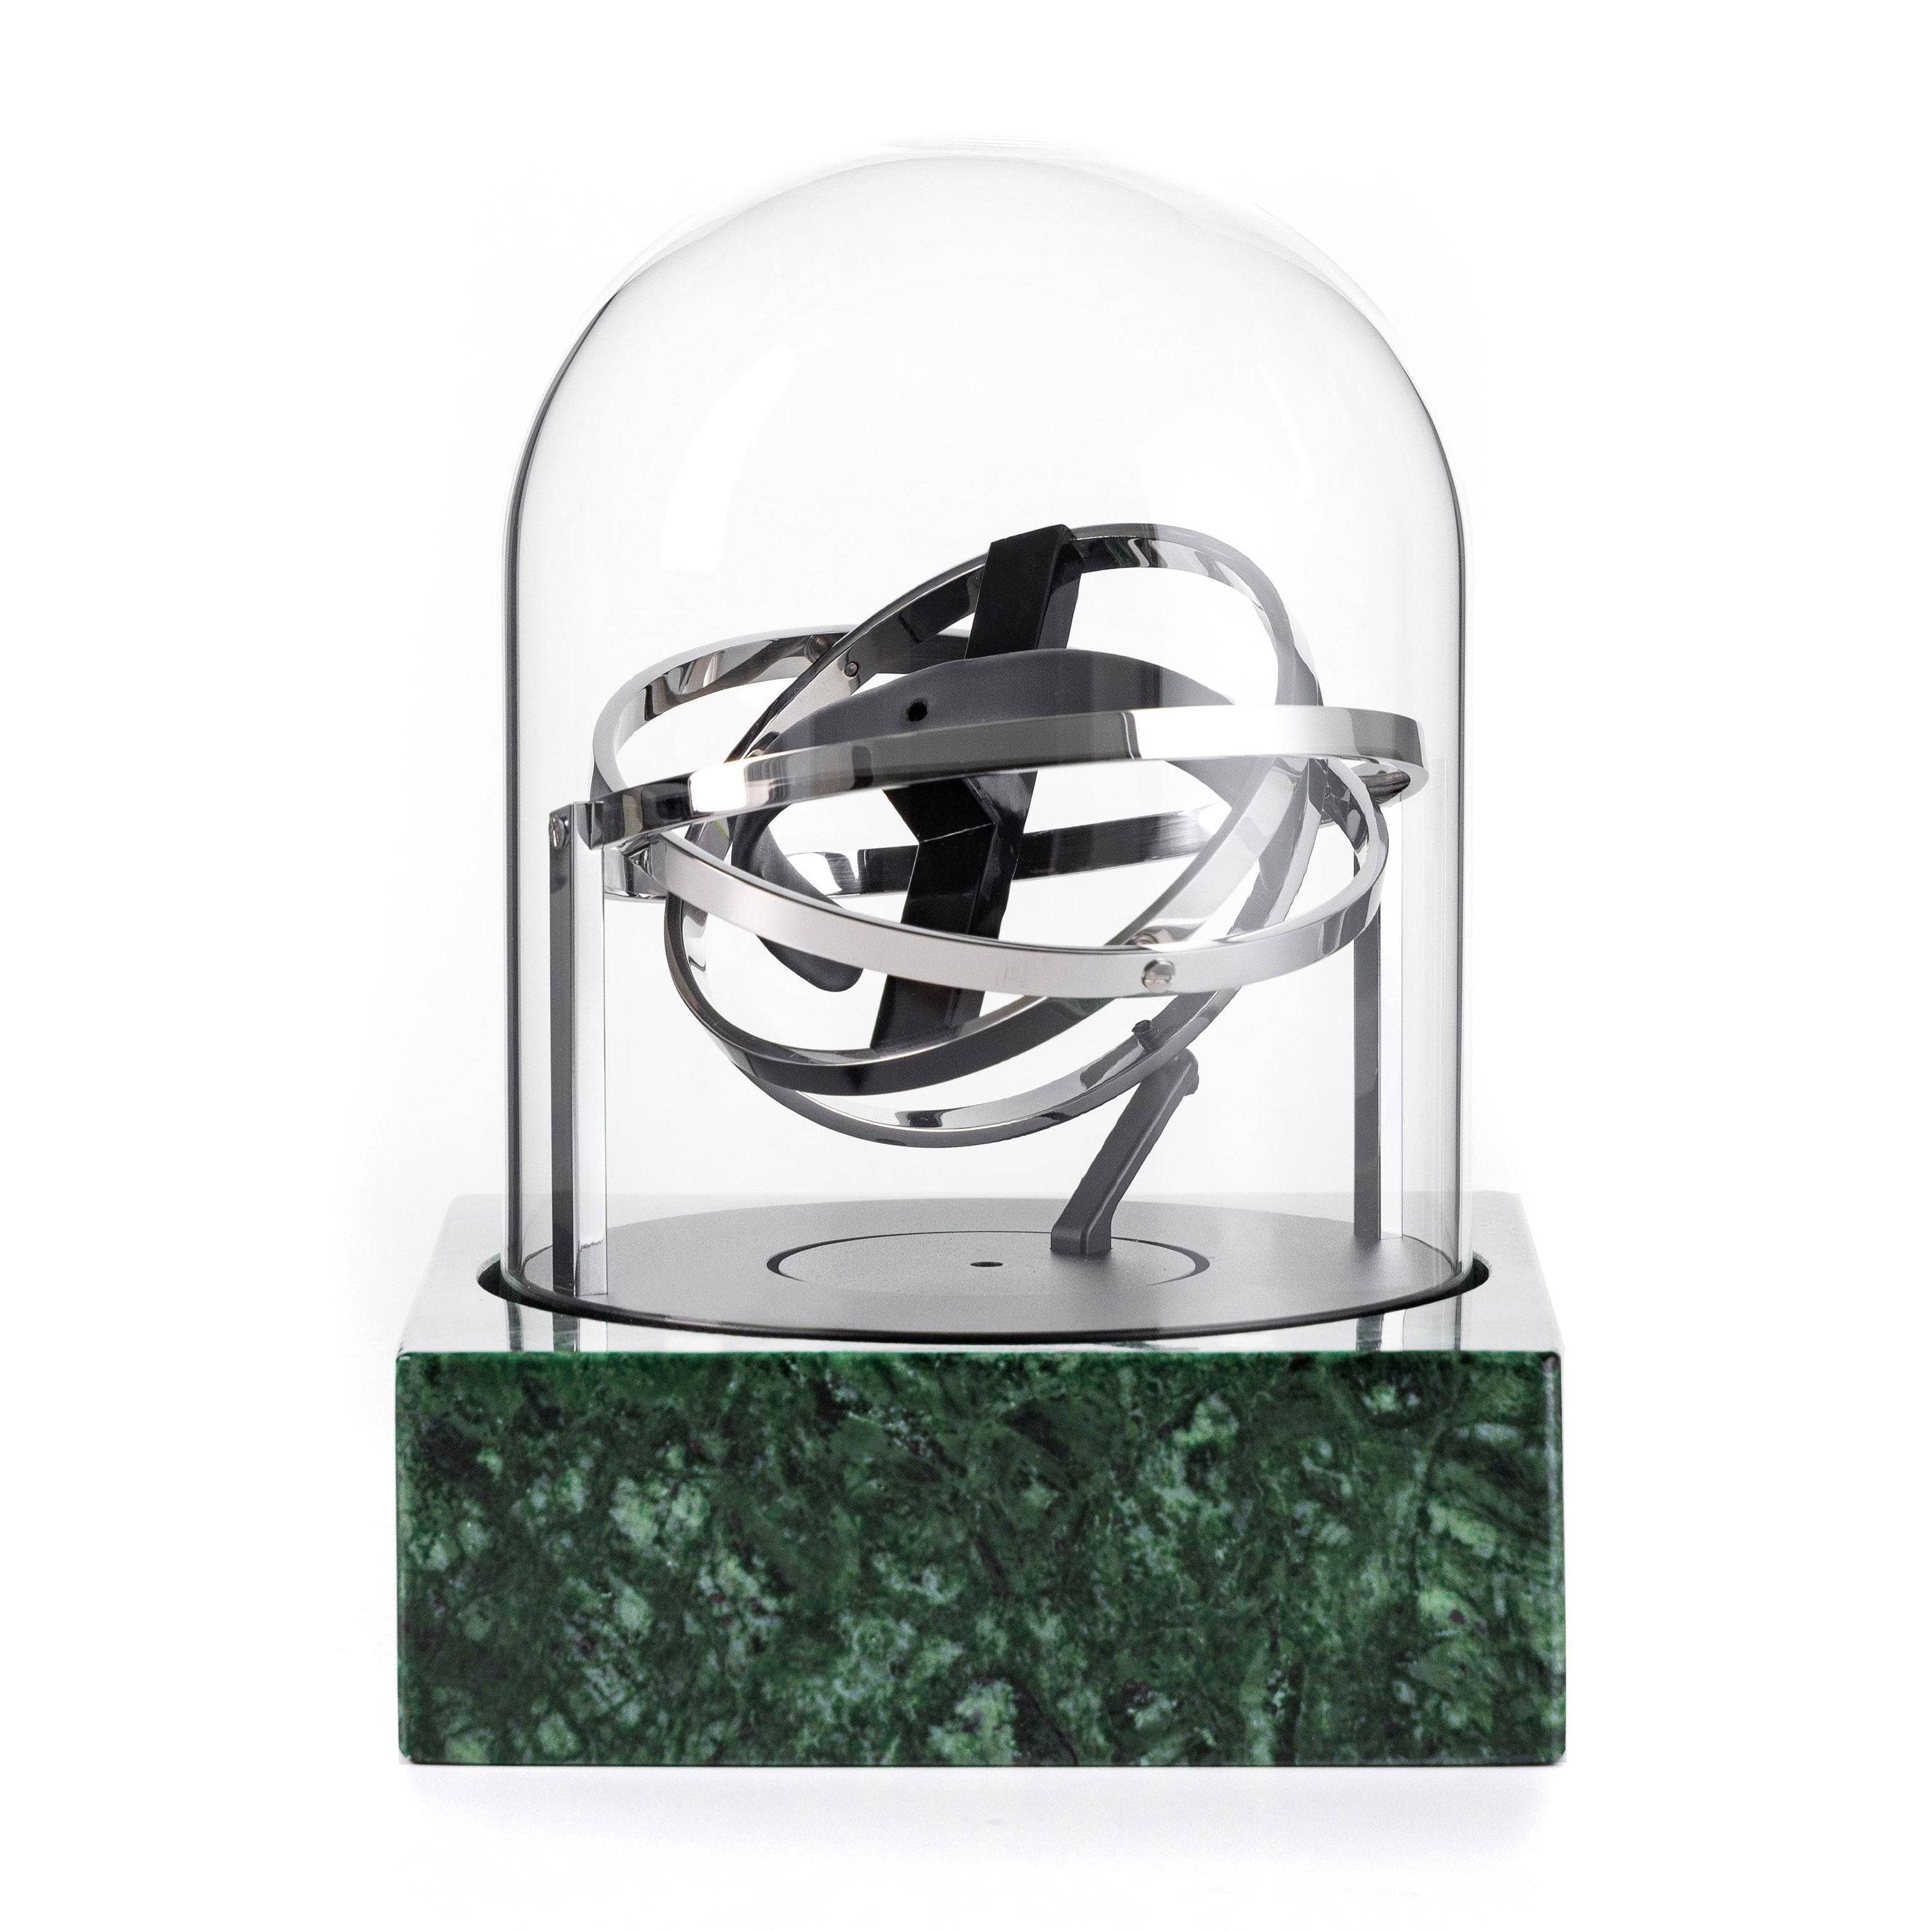 Single Watch Winder - Astronomia X1 Gold - Green Marble Edition